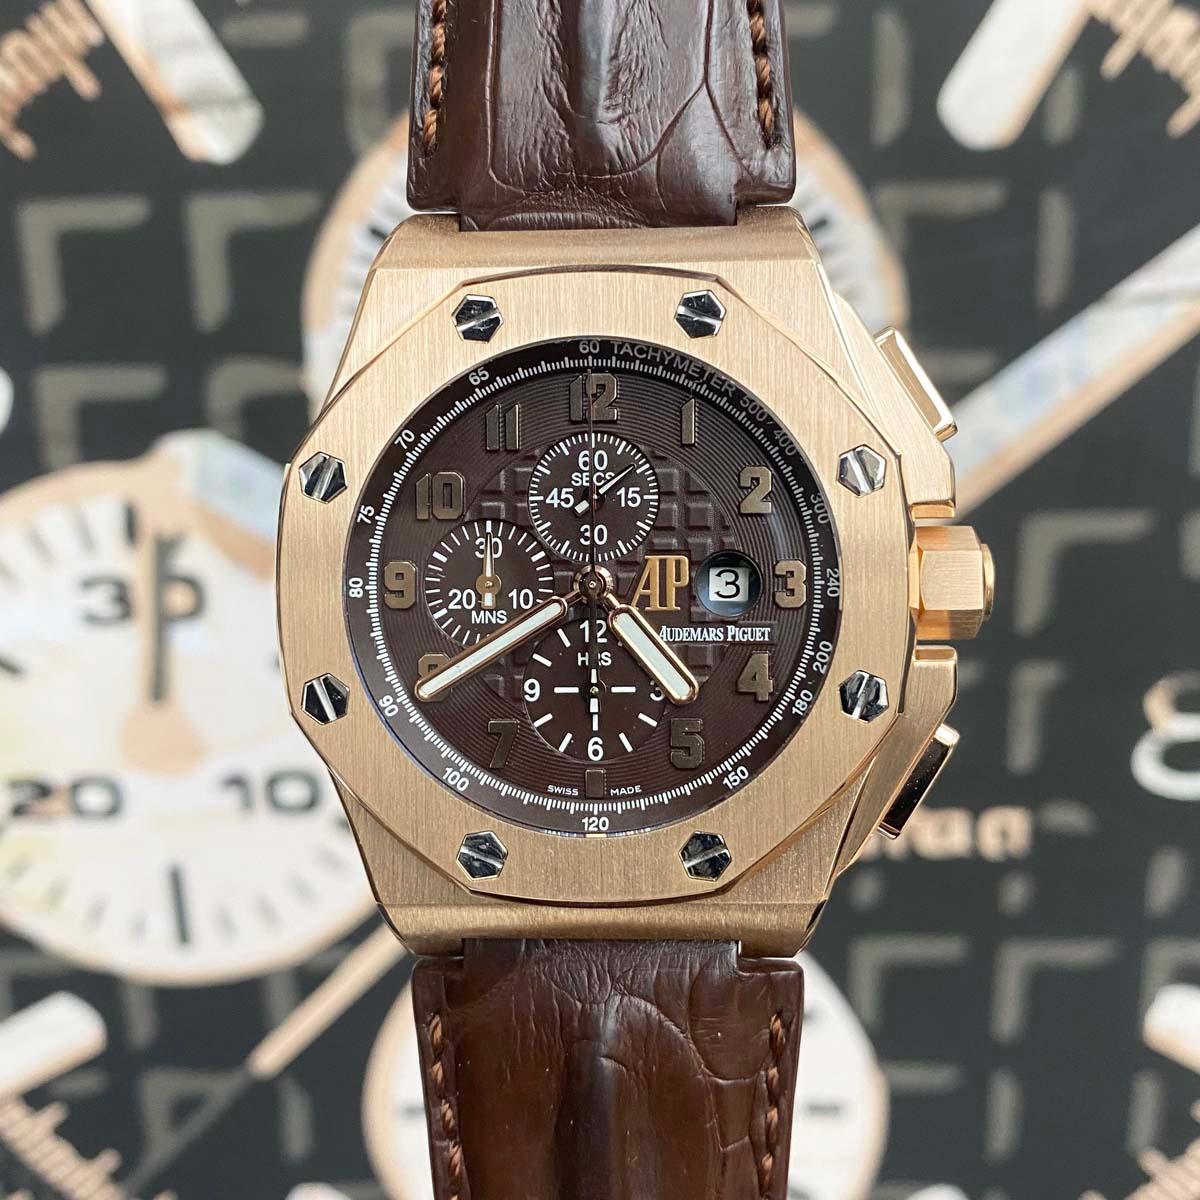 Audemars Piguet Limited Edition All-Star Royal Oak Offshore Chronograph 26158OR Pre-Owned Mint Condition New Strap! - Gotham Trading 